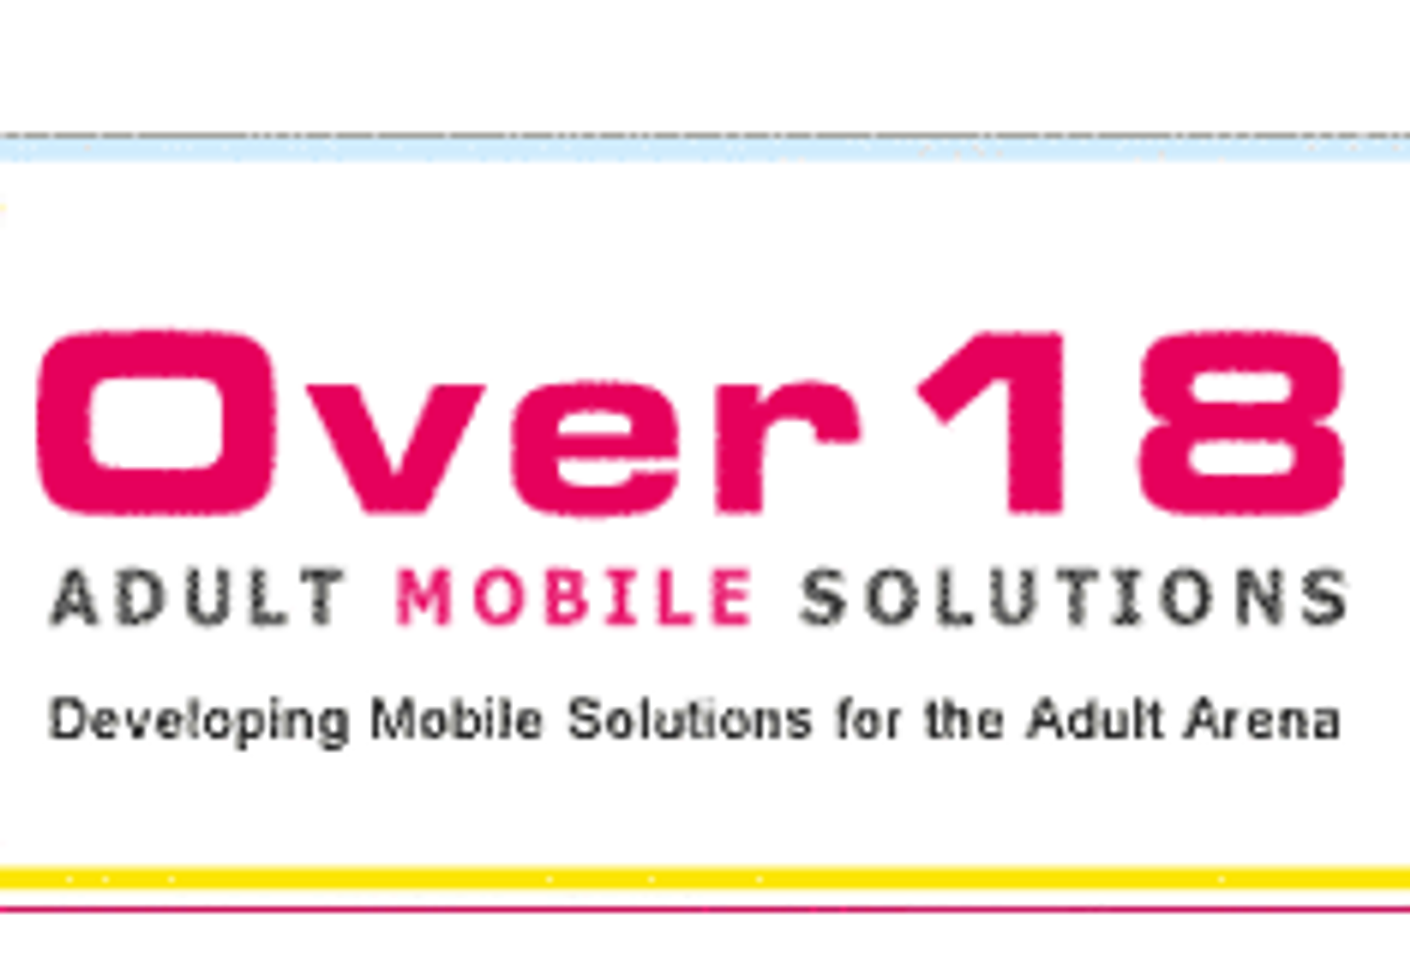 AdultMobileSolutions Launches Web-to-WAP Service